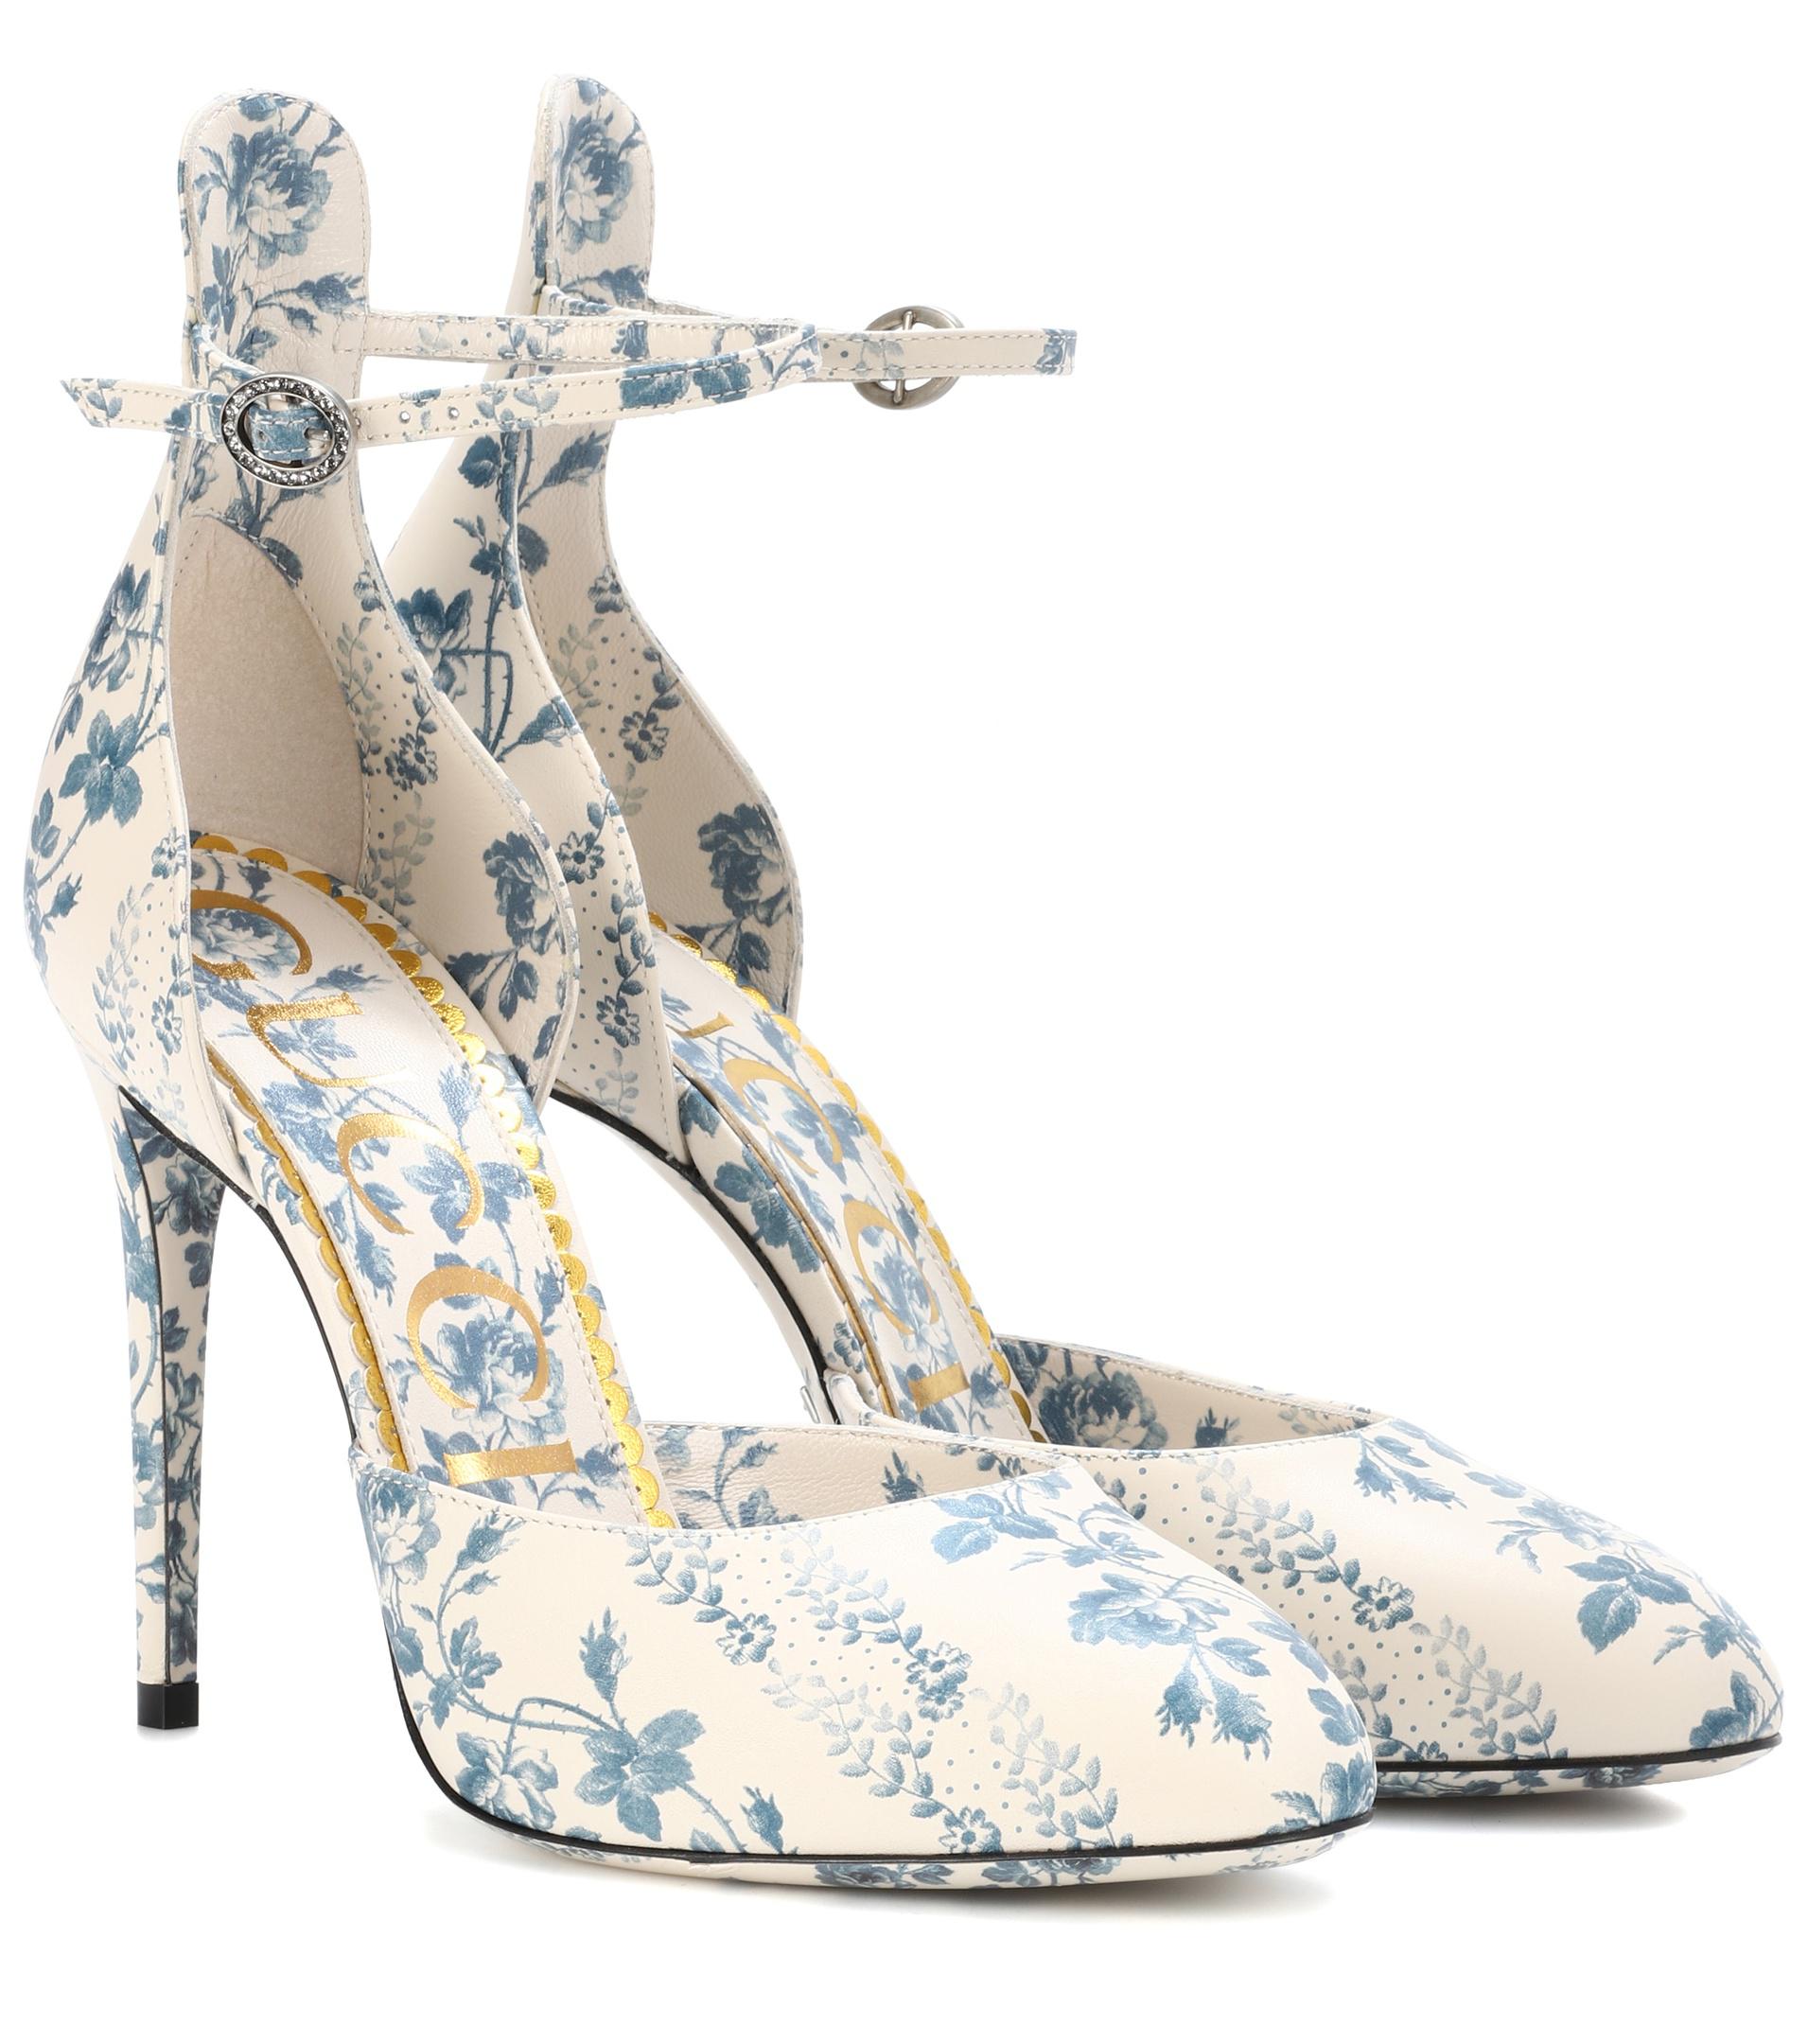 Gucci Floral-printed Leather Pumps in Blue - Lyst